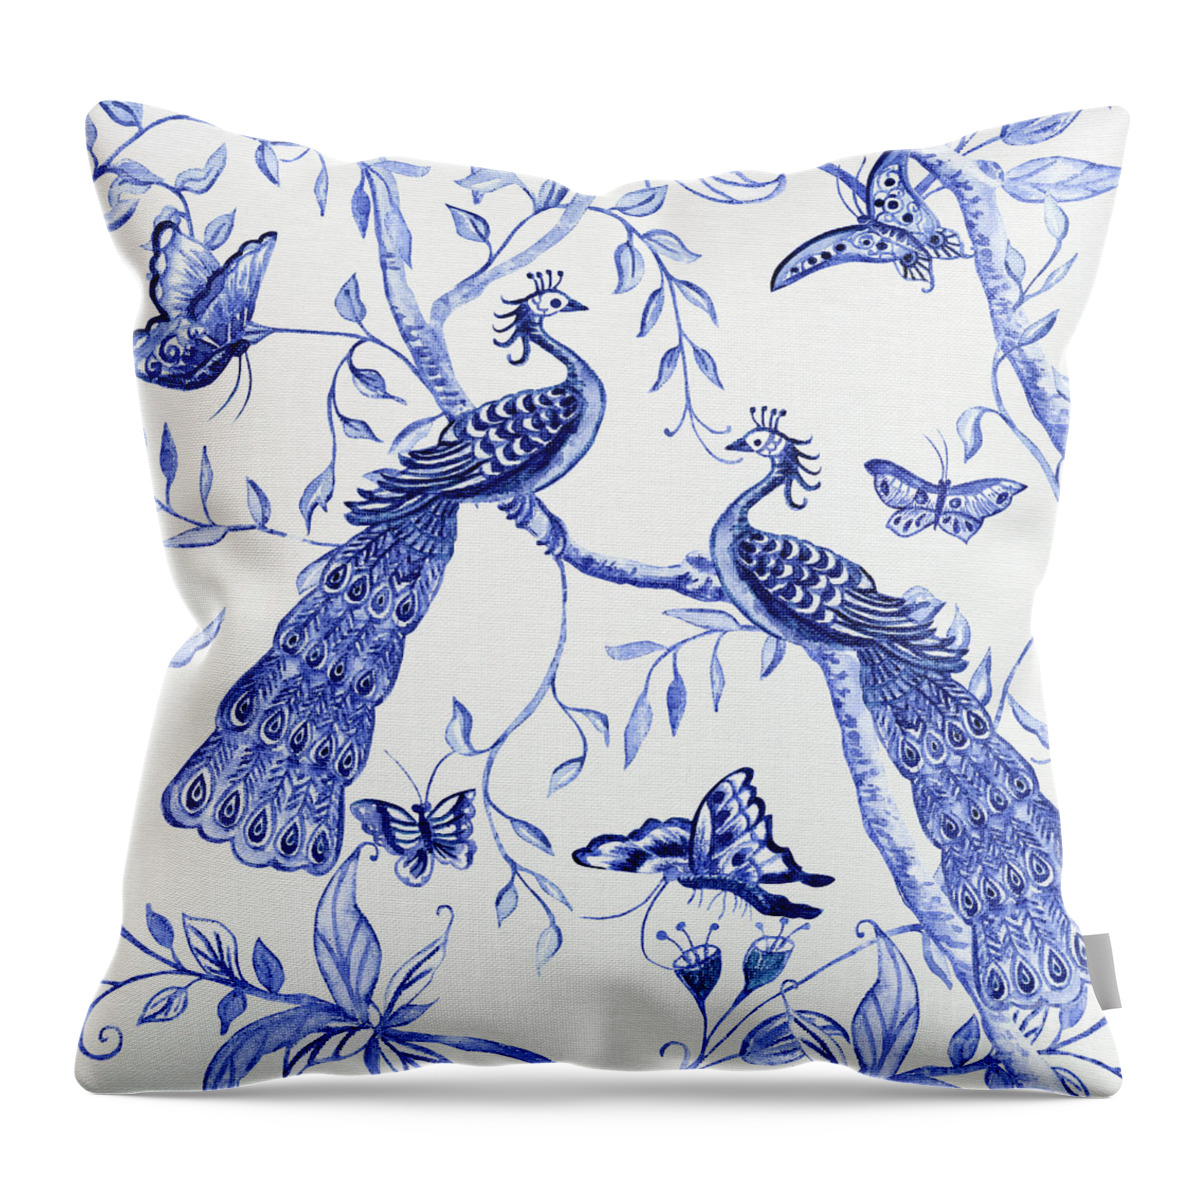 Chinoiserie Throw Pillow featuring the painting Chinoiserie Blue and White Peacocks and Butterflies by Audrey Jeanne Roberts